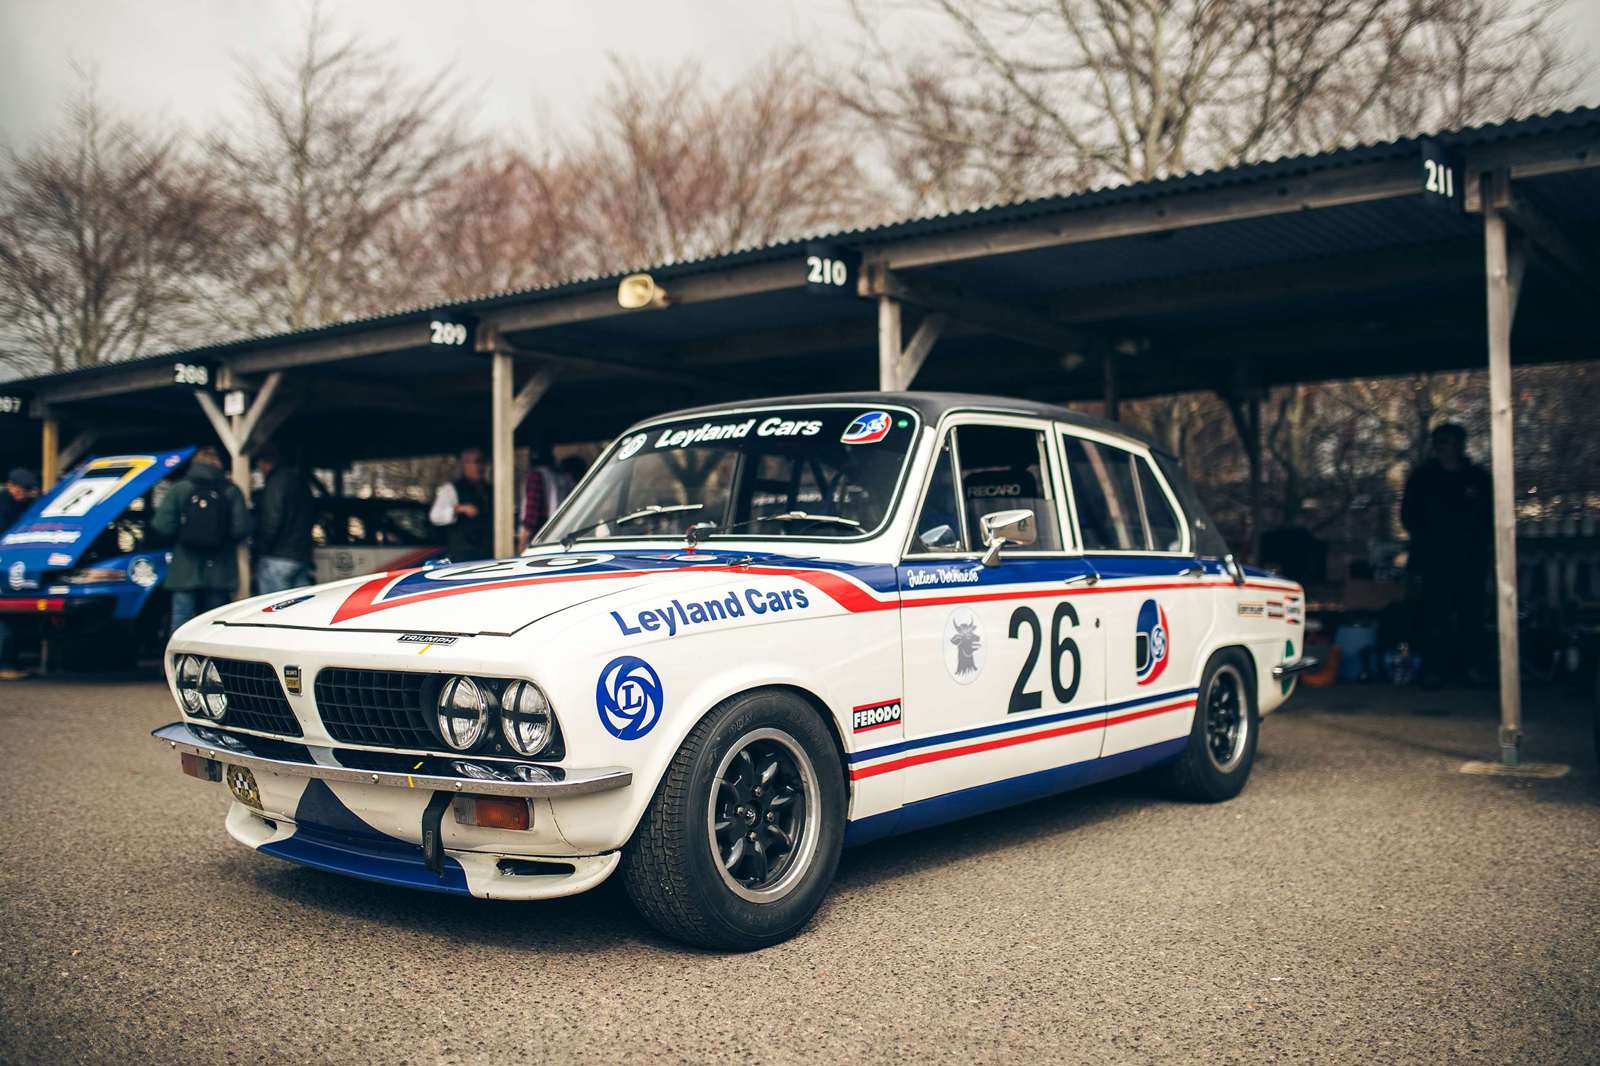 aborre Trampe mikroskopisk This Triumph Dolomite has been a racer since day one